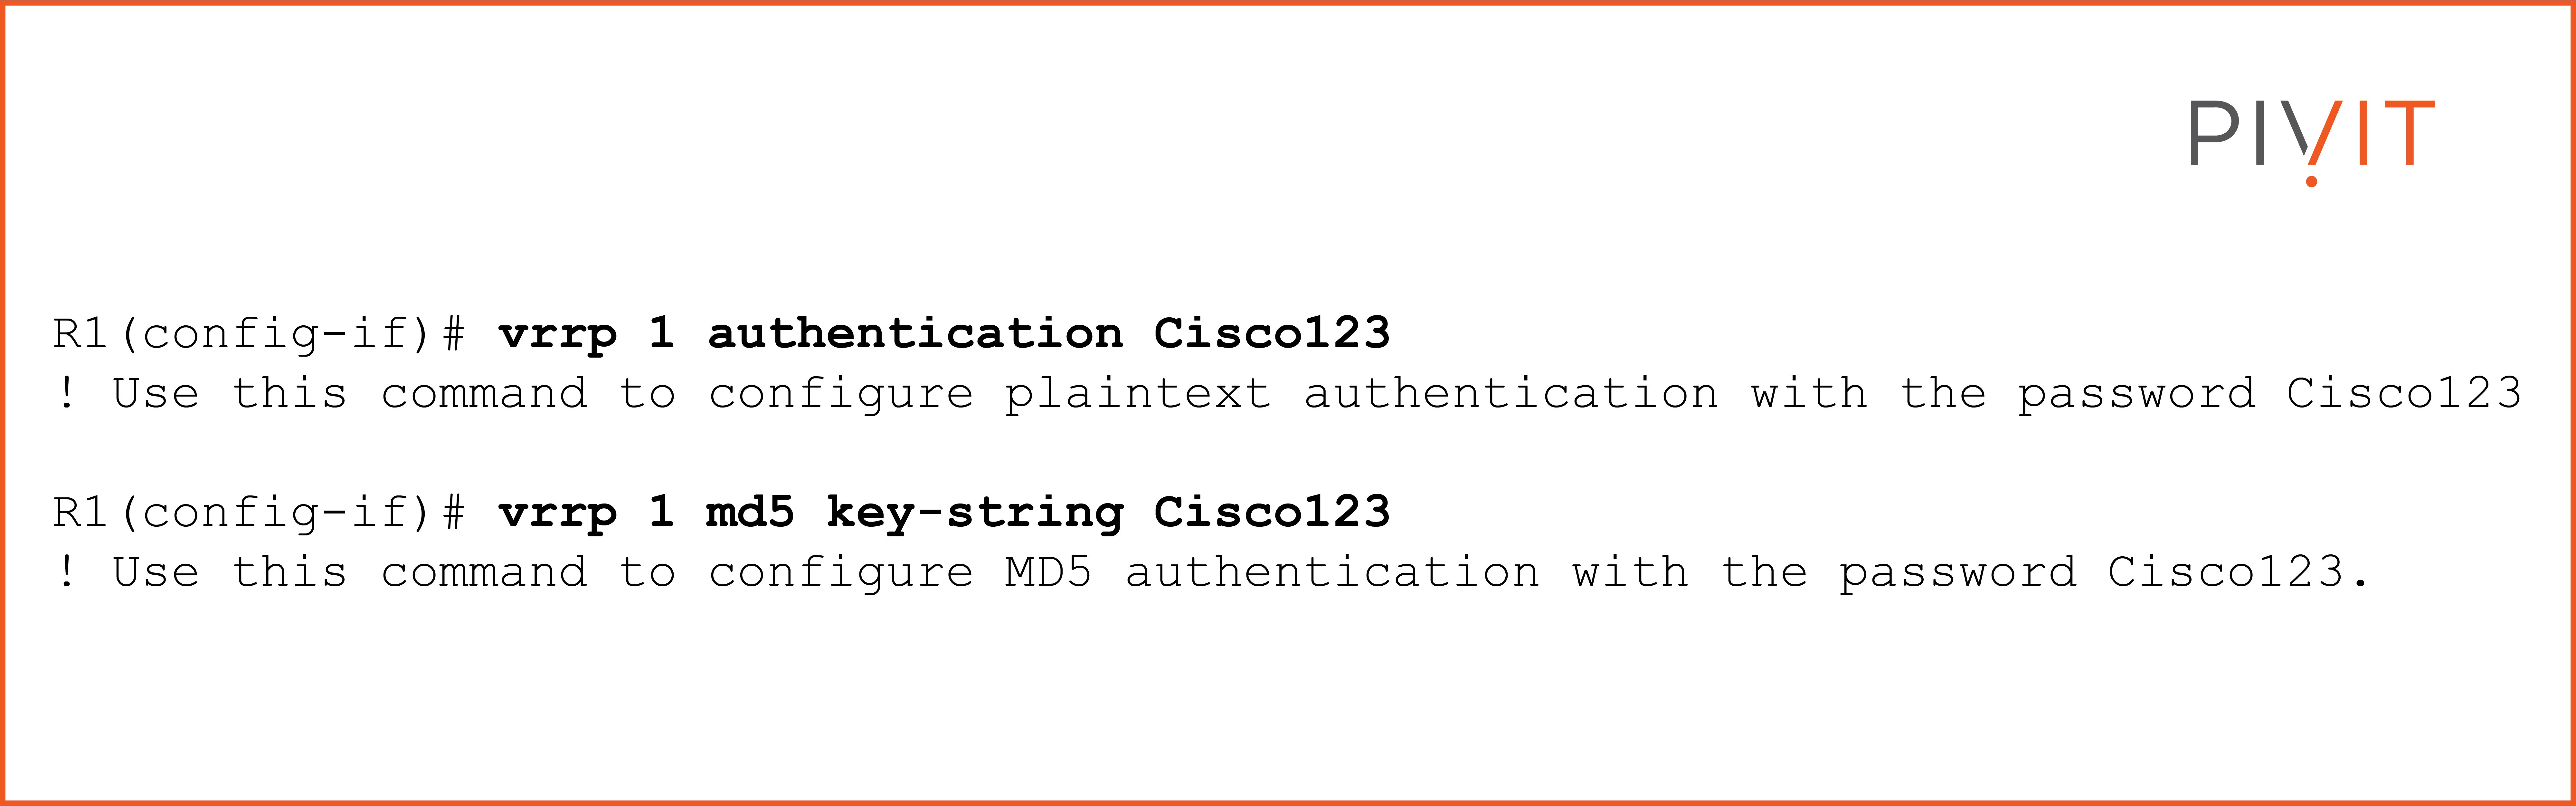 Commands to enable plaintext and MD5 authentication on R1